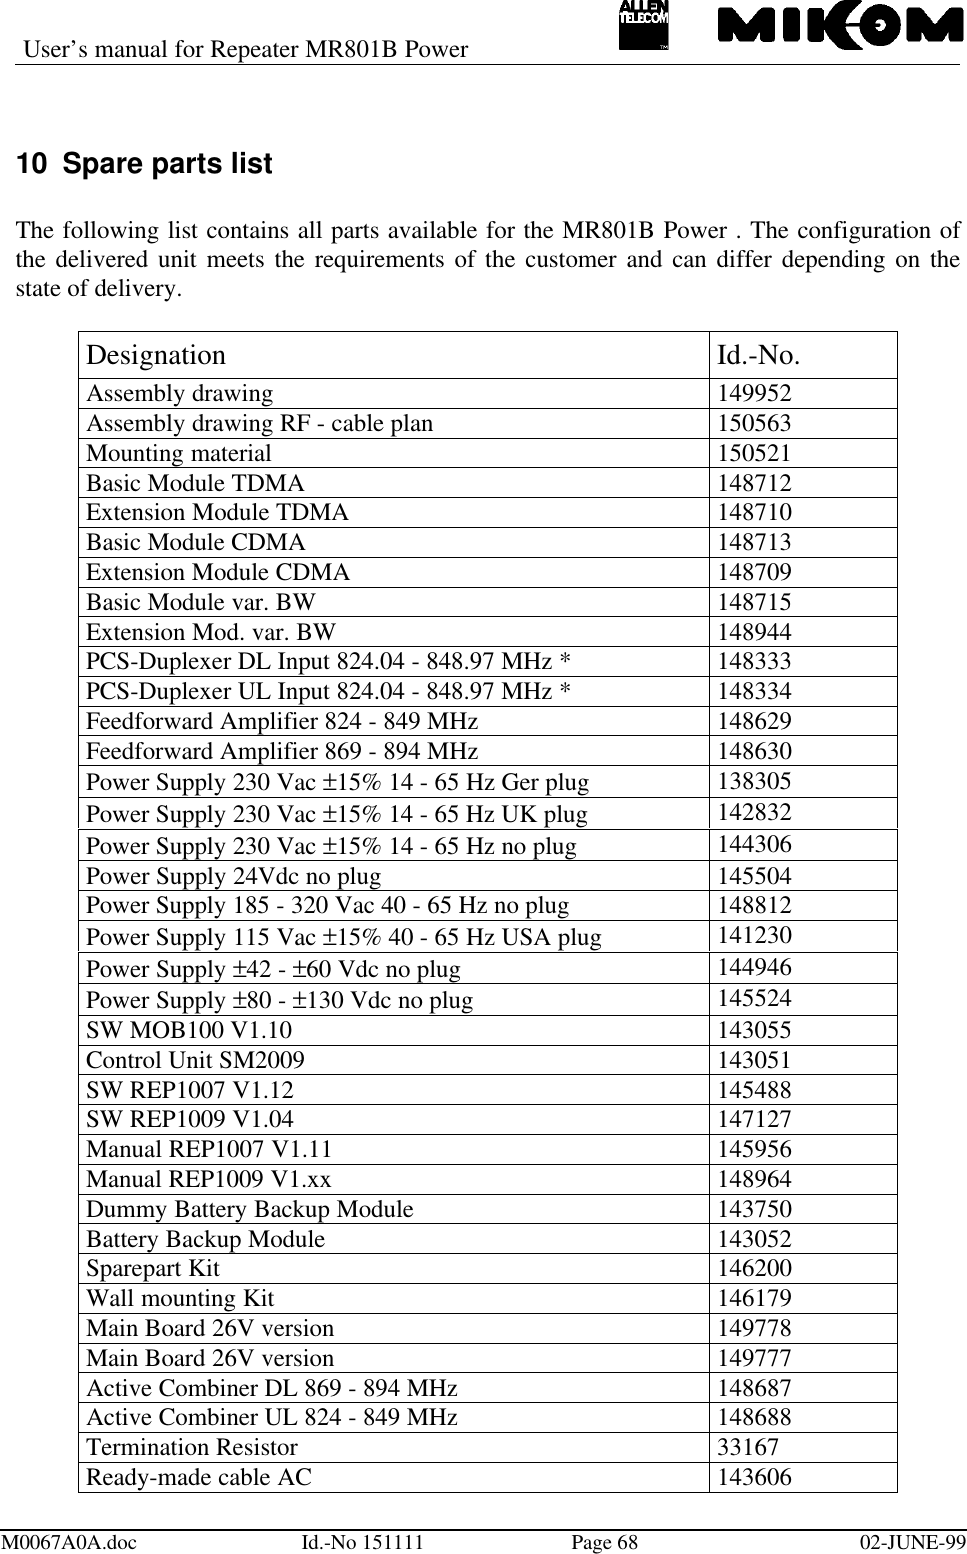 User’s manual for Repeater MR801B PowerM0067A0A.doc Id.-No 151111 Page 68 02-JUNE-9910 Spare parts listThe following list contains all parts available for the MR801B Power . The configuration ofthe delivered unit meets the requirements of the customer and can differ depending on thestate of delivery.Designation Id.-No.Assembly drawing 149952Assembly drawing RF - cable plan 150563Mounting material 150521Basic Module TDMA 148712Extension Module TDMA 148710Basic Module CDMA 148713Extension Module CDMA 148709Basic Module var. BW 148715Extension Mod. var. BW 148944PCS-Duplexer DL Input 824.04 - 848.97 MHz * 148333PCS-Duplexer UL Input 824.04 - 848.97 MHz * 148334Feedforward Amplifier 824 - 849 MHz 148629Feedforward Amplifier 869 - 894 MHz 148630Power Supply 230 Vac ±15% 14 - 65 Hz Ger plug 138305Power Supply 230 Vac ±15% 14 - 65 Hz UK plug 142832Power Supply 230 Vac ±15% 14 - 65 Hz no plug 144306Power Supply 24Vdc no plug 145504Power Supply 185 - 320 Vac 40 - 65 Hz no plug 148812Power Supply 115 Vac ±15% 40 - 65 Hz USA plug 141230Power Supply ±42 - ±60 Vdc no plug 144946Power Supply ±80 - ±130 Vdc no plug 145524SW MOB100 V1.10 143055Control Unit SM2009 143051SW REP1007 V1.12 145488SW REP1009 V1.04 147127Manual REP1007 V1.11 145956Manual REP1009 V1.xx 148964Dummy Battery Backup Module 143750Battery Backup Module 143052Sparepart Kit 146200Wall mounting Kit 146179Main Board 26V version 149778Main Board 26V version 149777Active Combiner DL 869 - 894 MHz 148687Active Combiner UL 824 - 849 MHz 148688Termination Resistor 33167Ready-made cable AC 143606